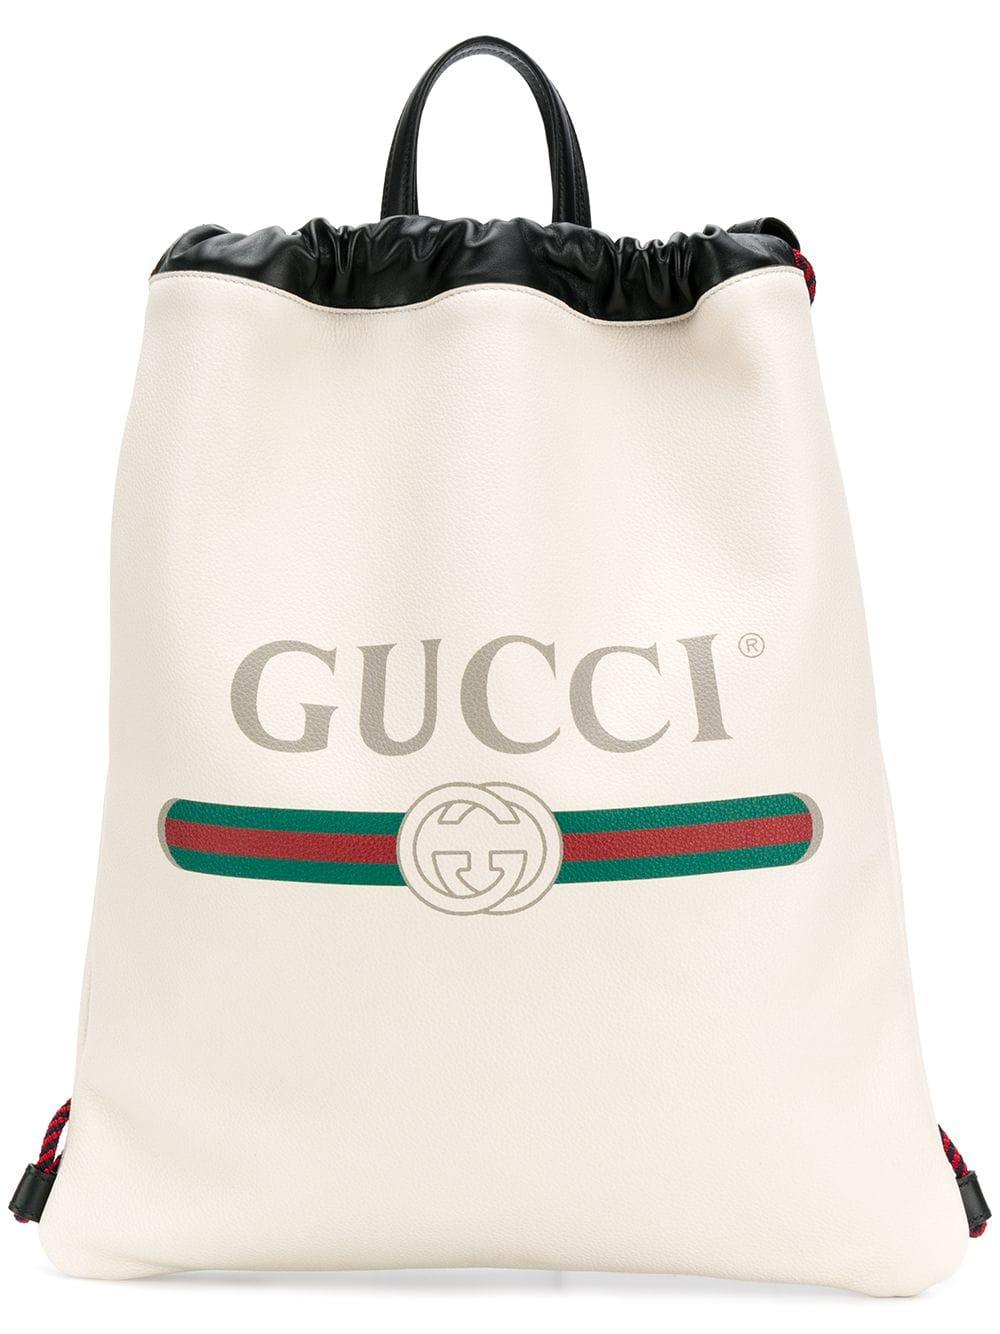 Gucci Leather Logo Print Drawstring Backpack in White - Save 9% - Lyst